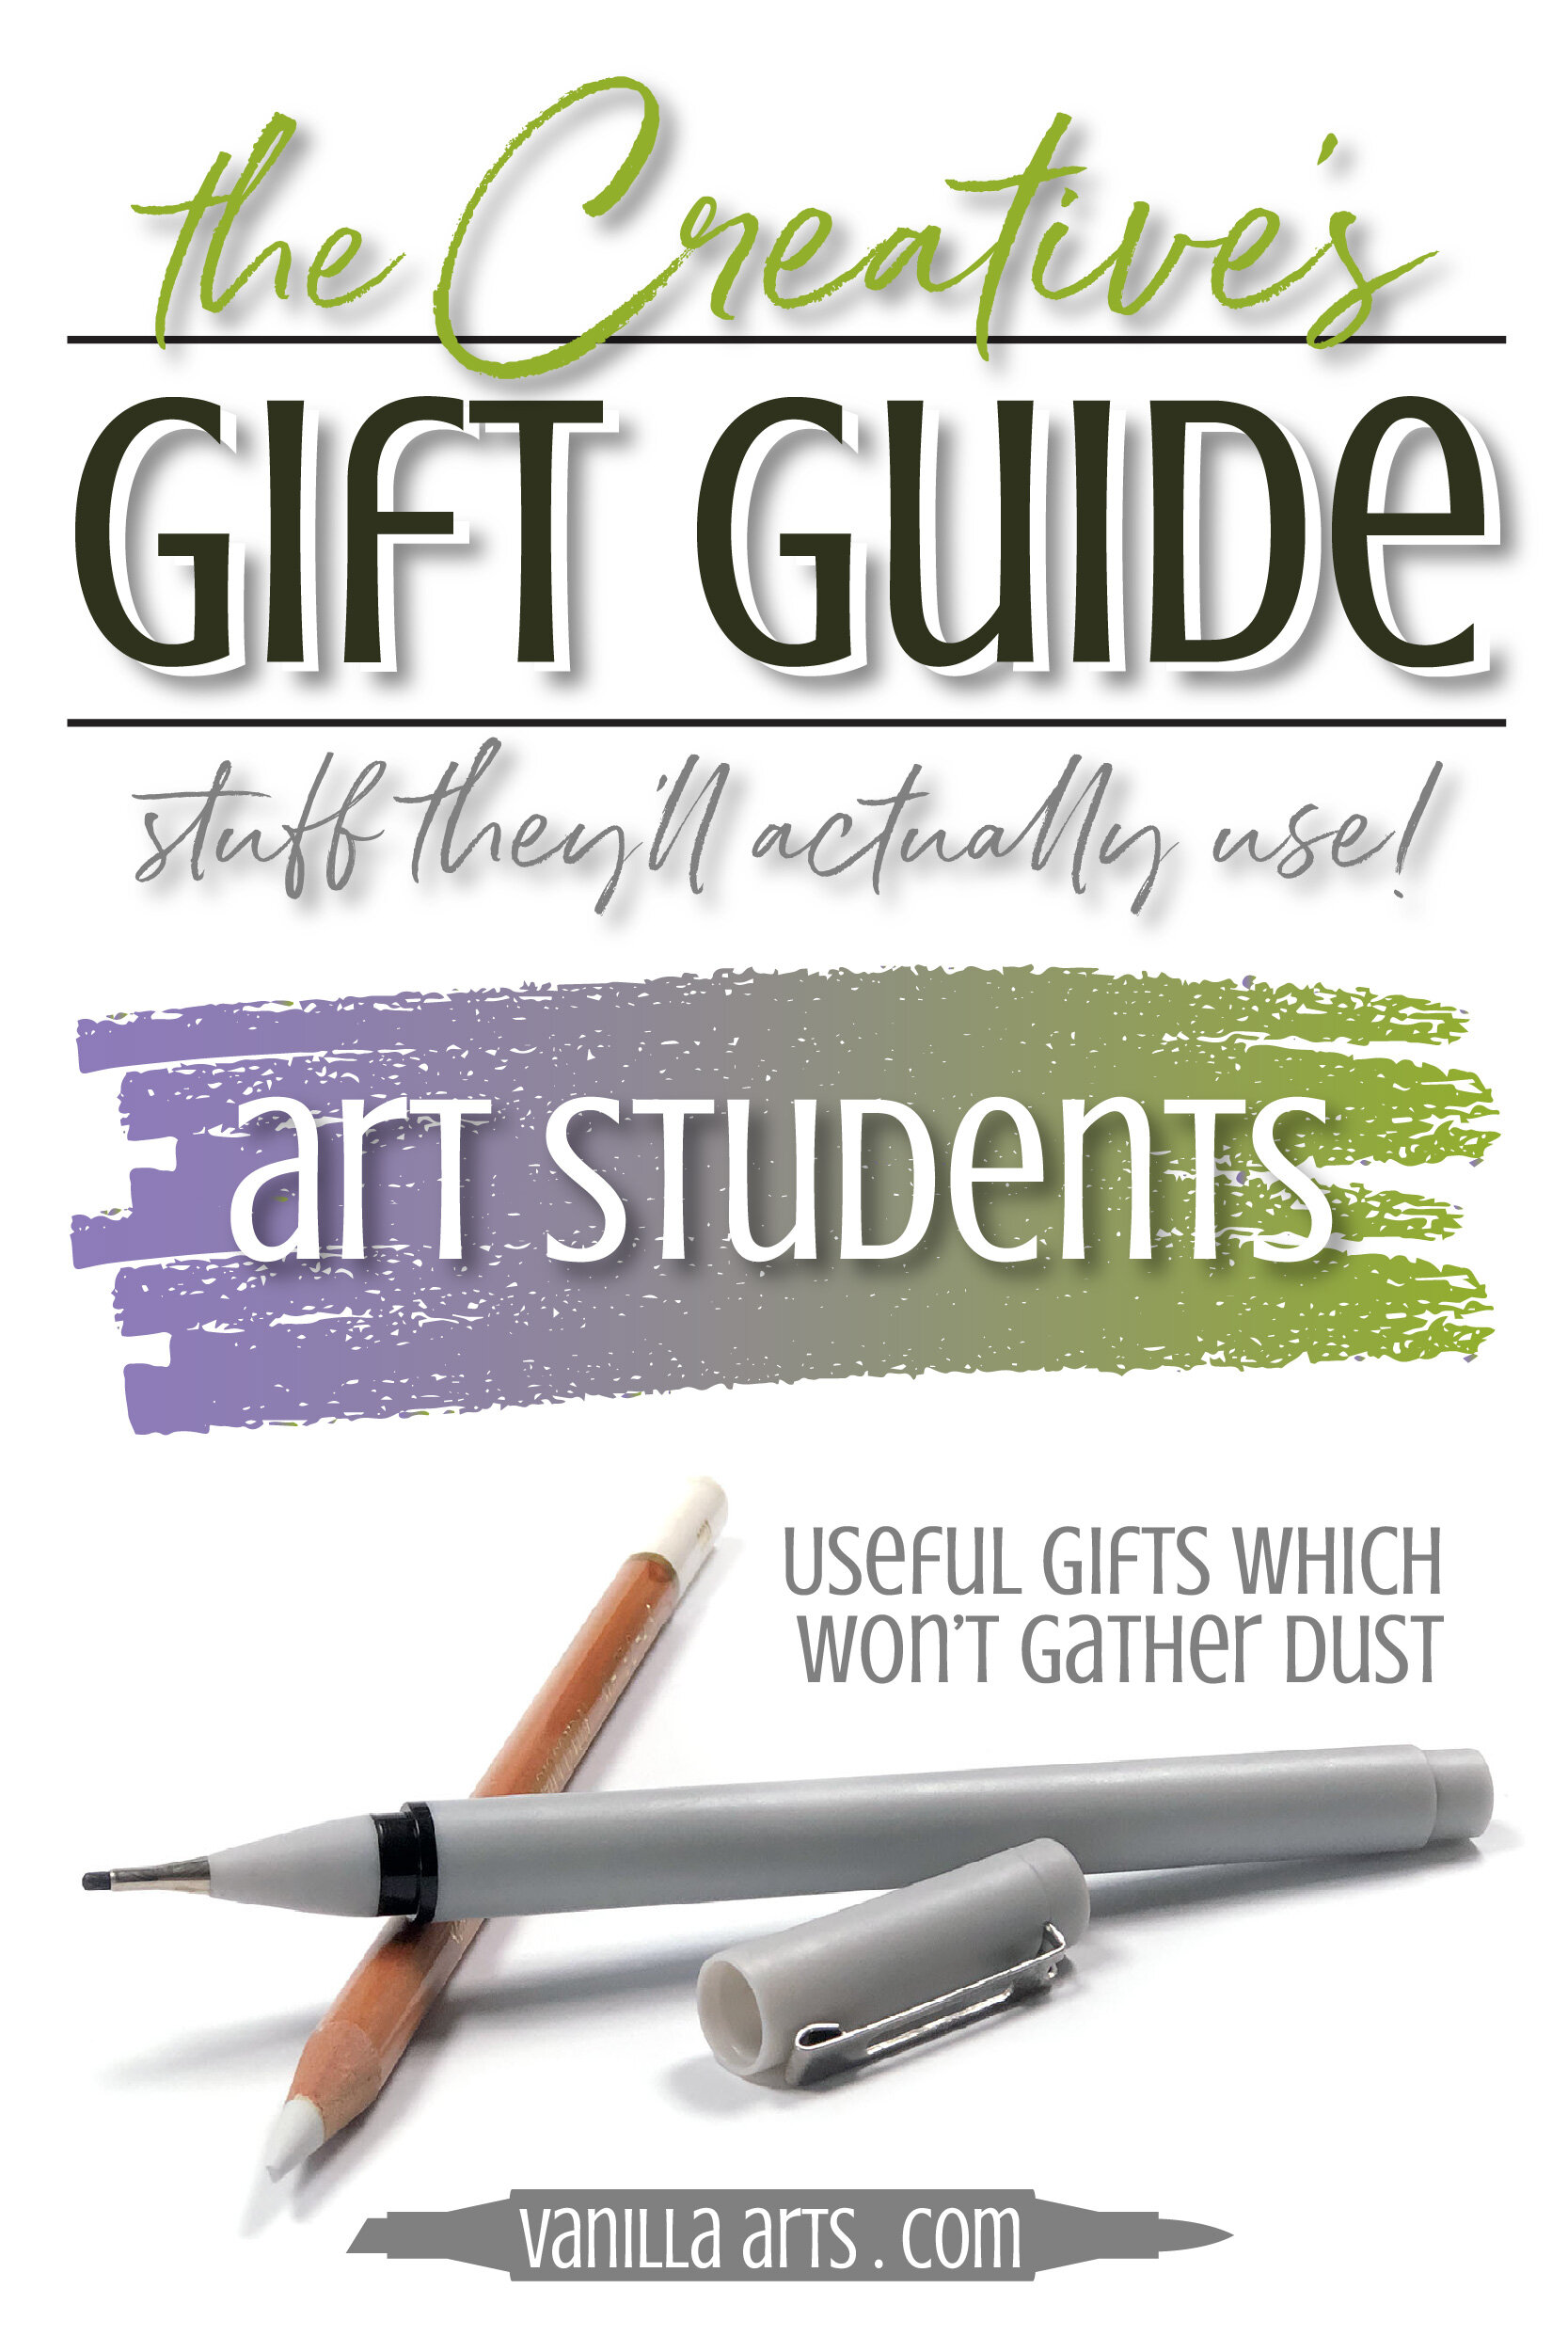 Gift Ideas for Art Students: The Creative's Gift Guide (Best Supplies for  College and Beyond) — Vanilla Arts Co.